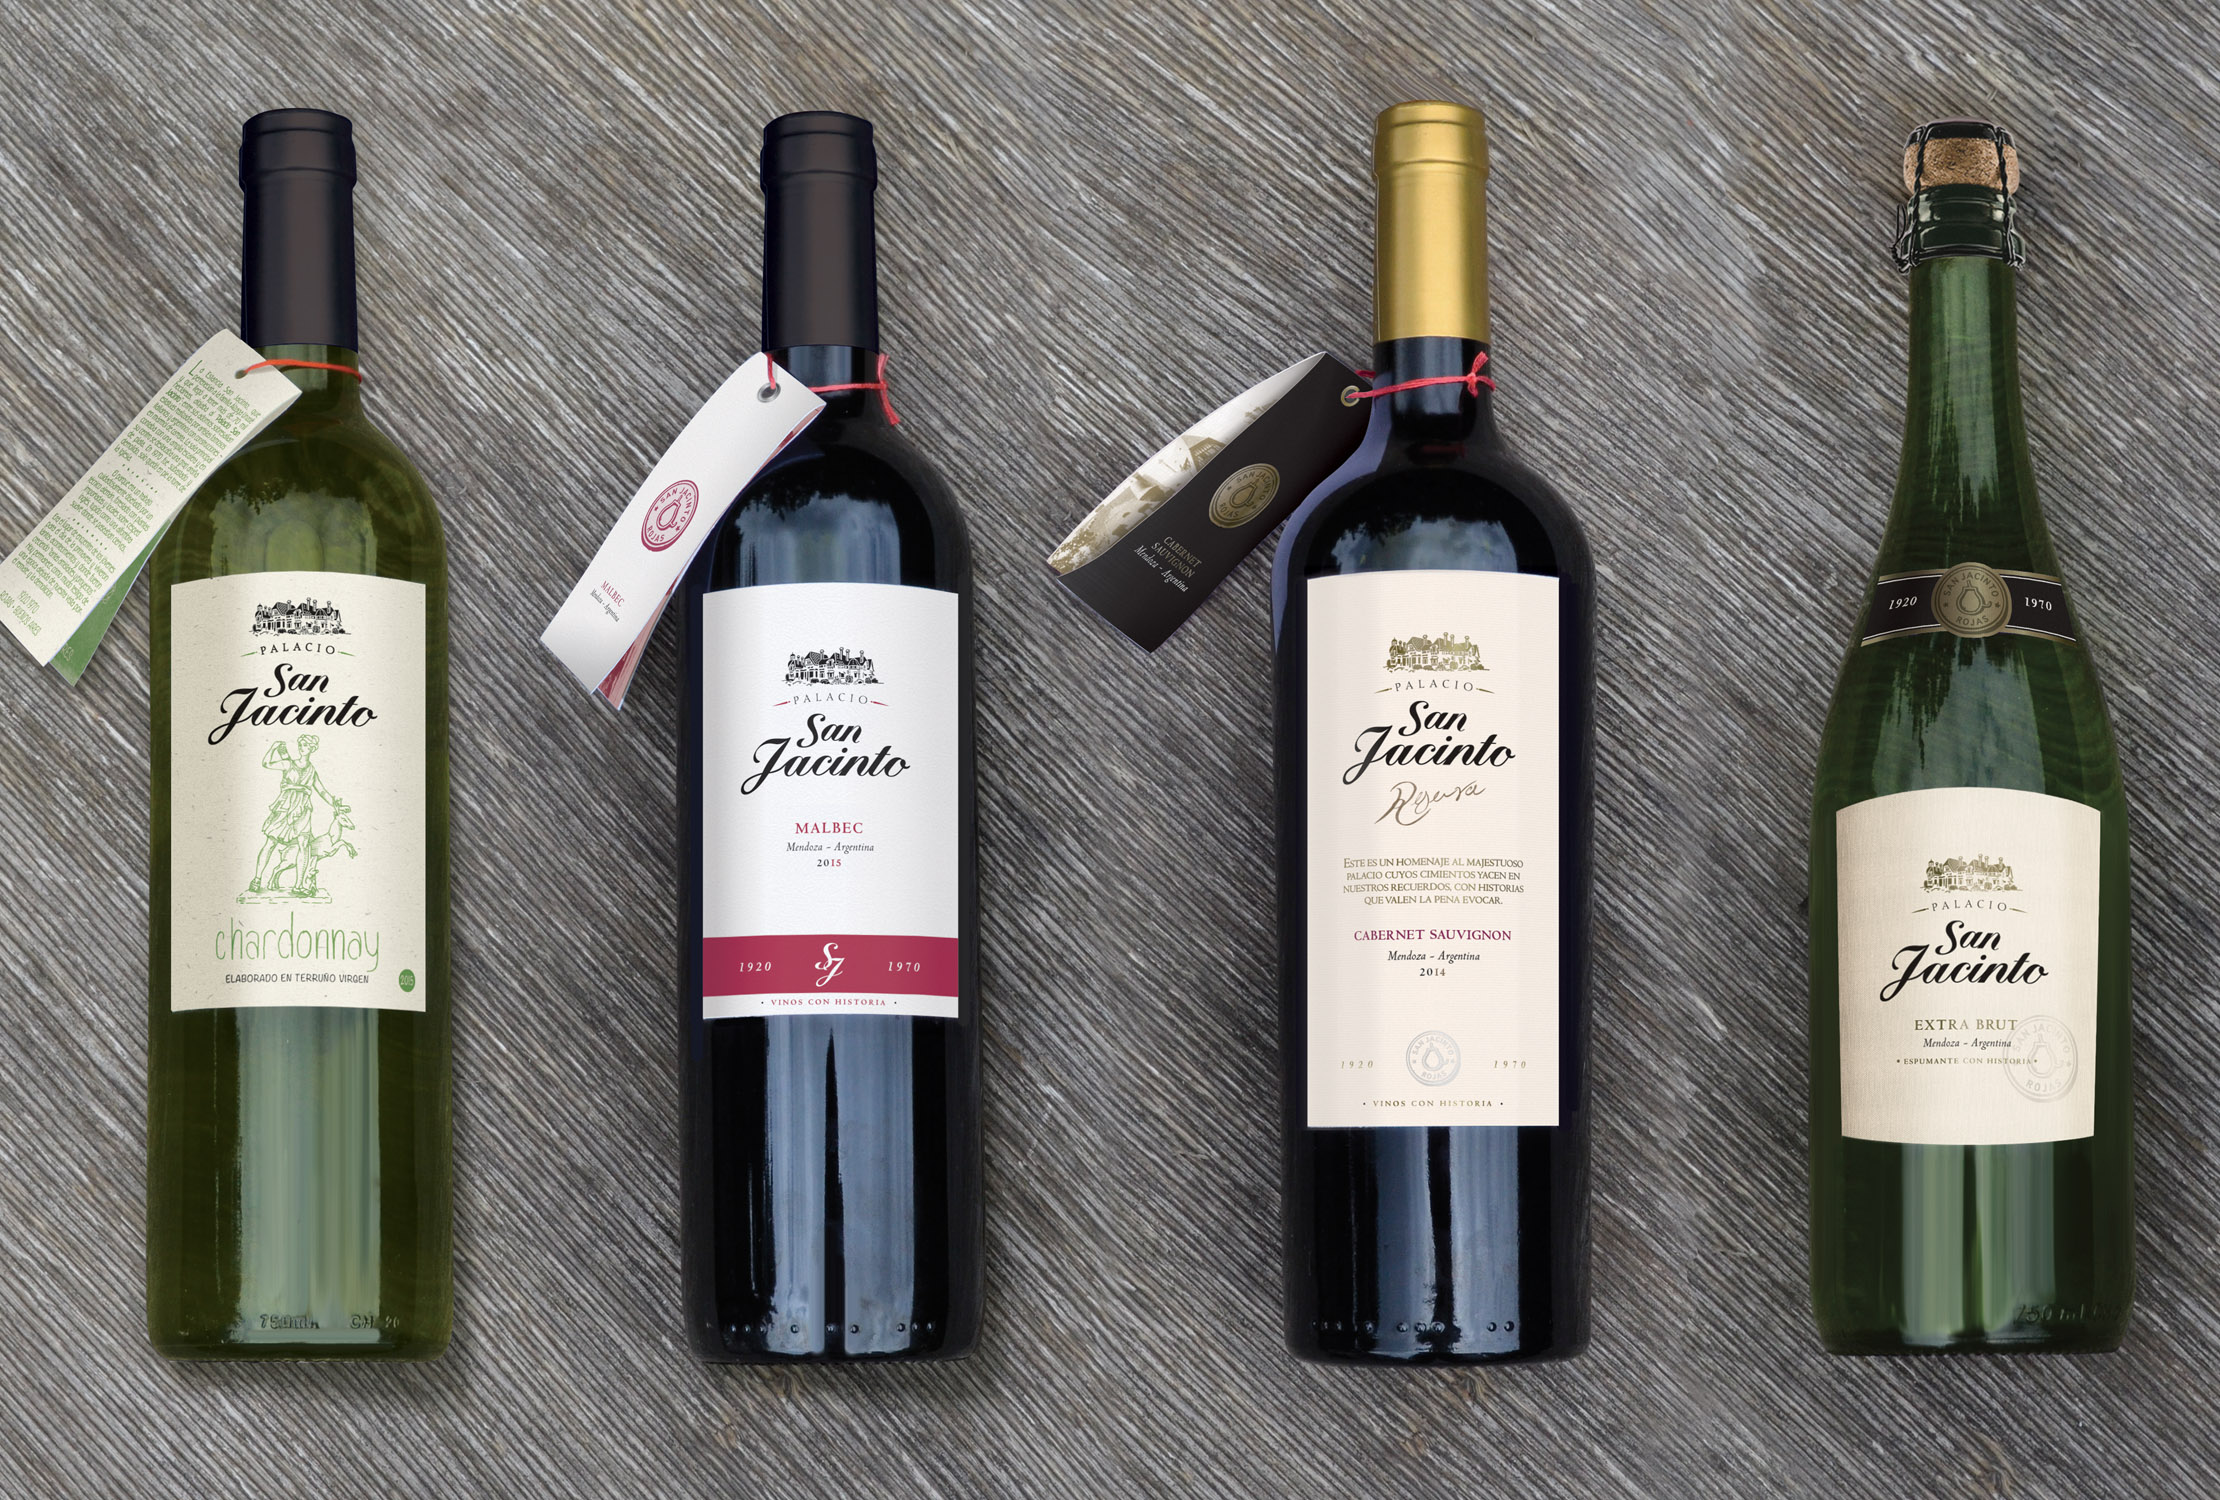 Argentinean Classic Line of Wines Characterised by Simple White Label Design